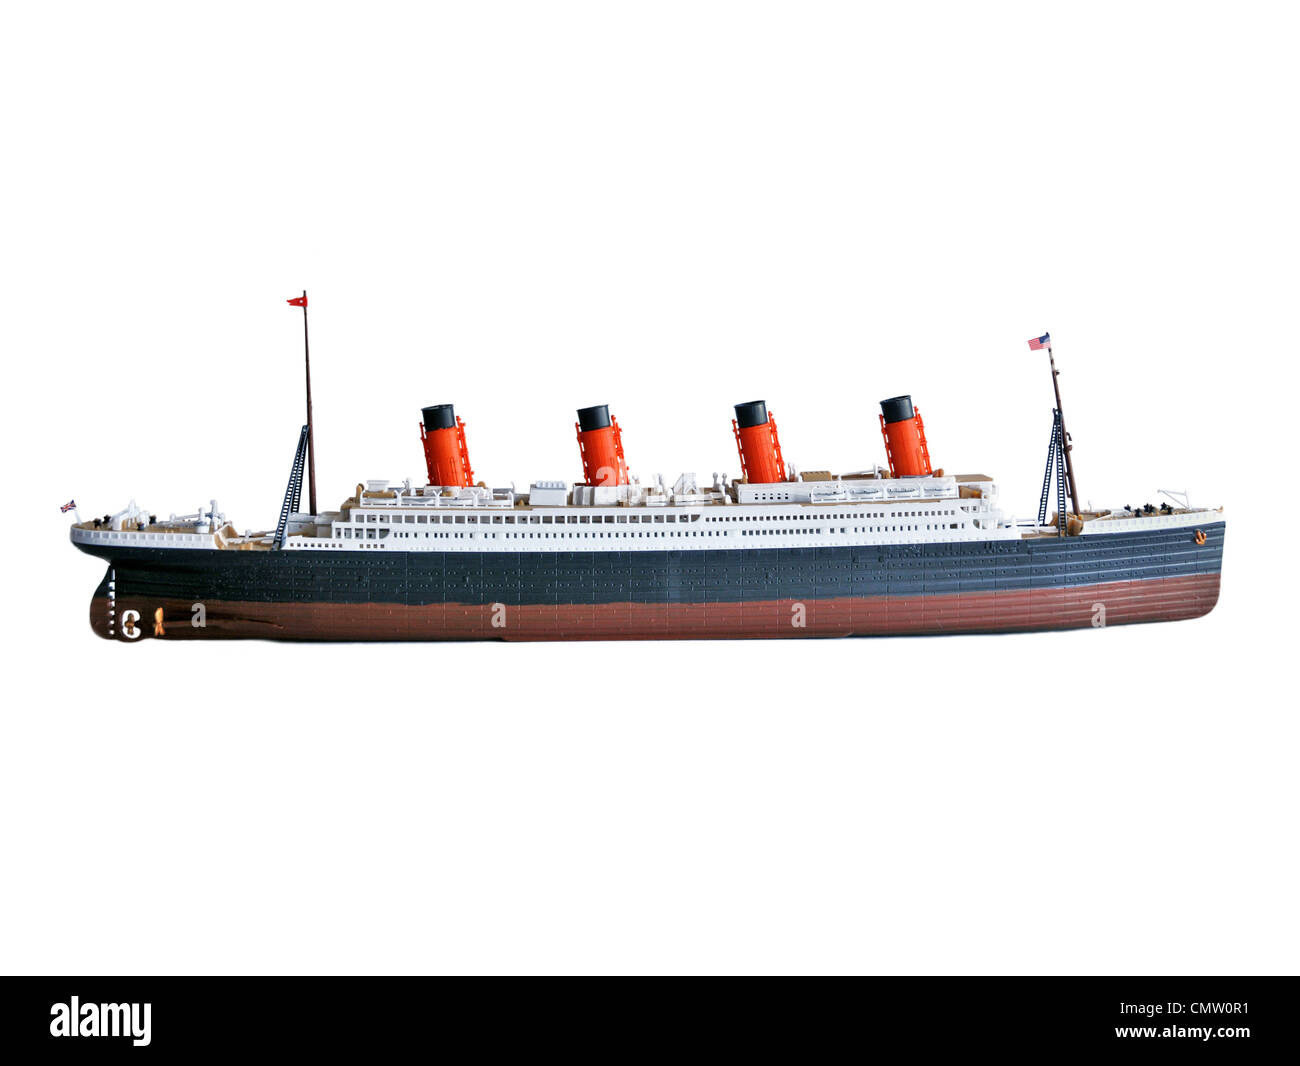 Accurate replica kit model of the Titanic ship against a white background. Stock Photo